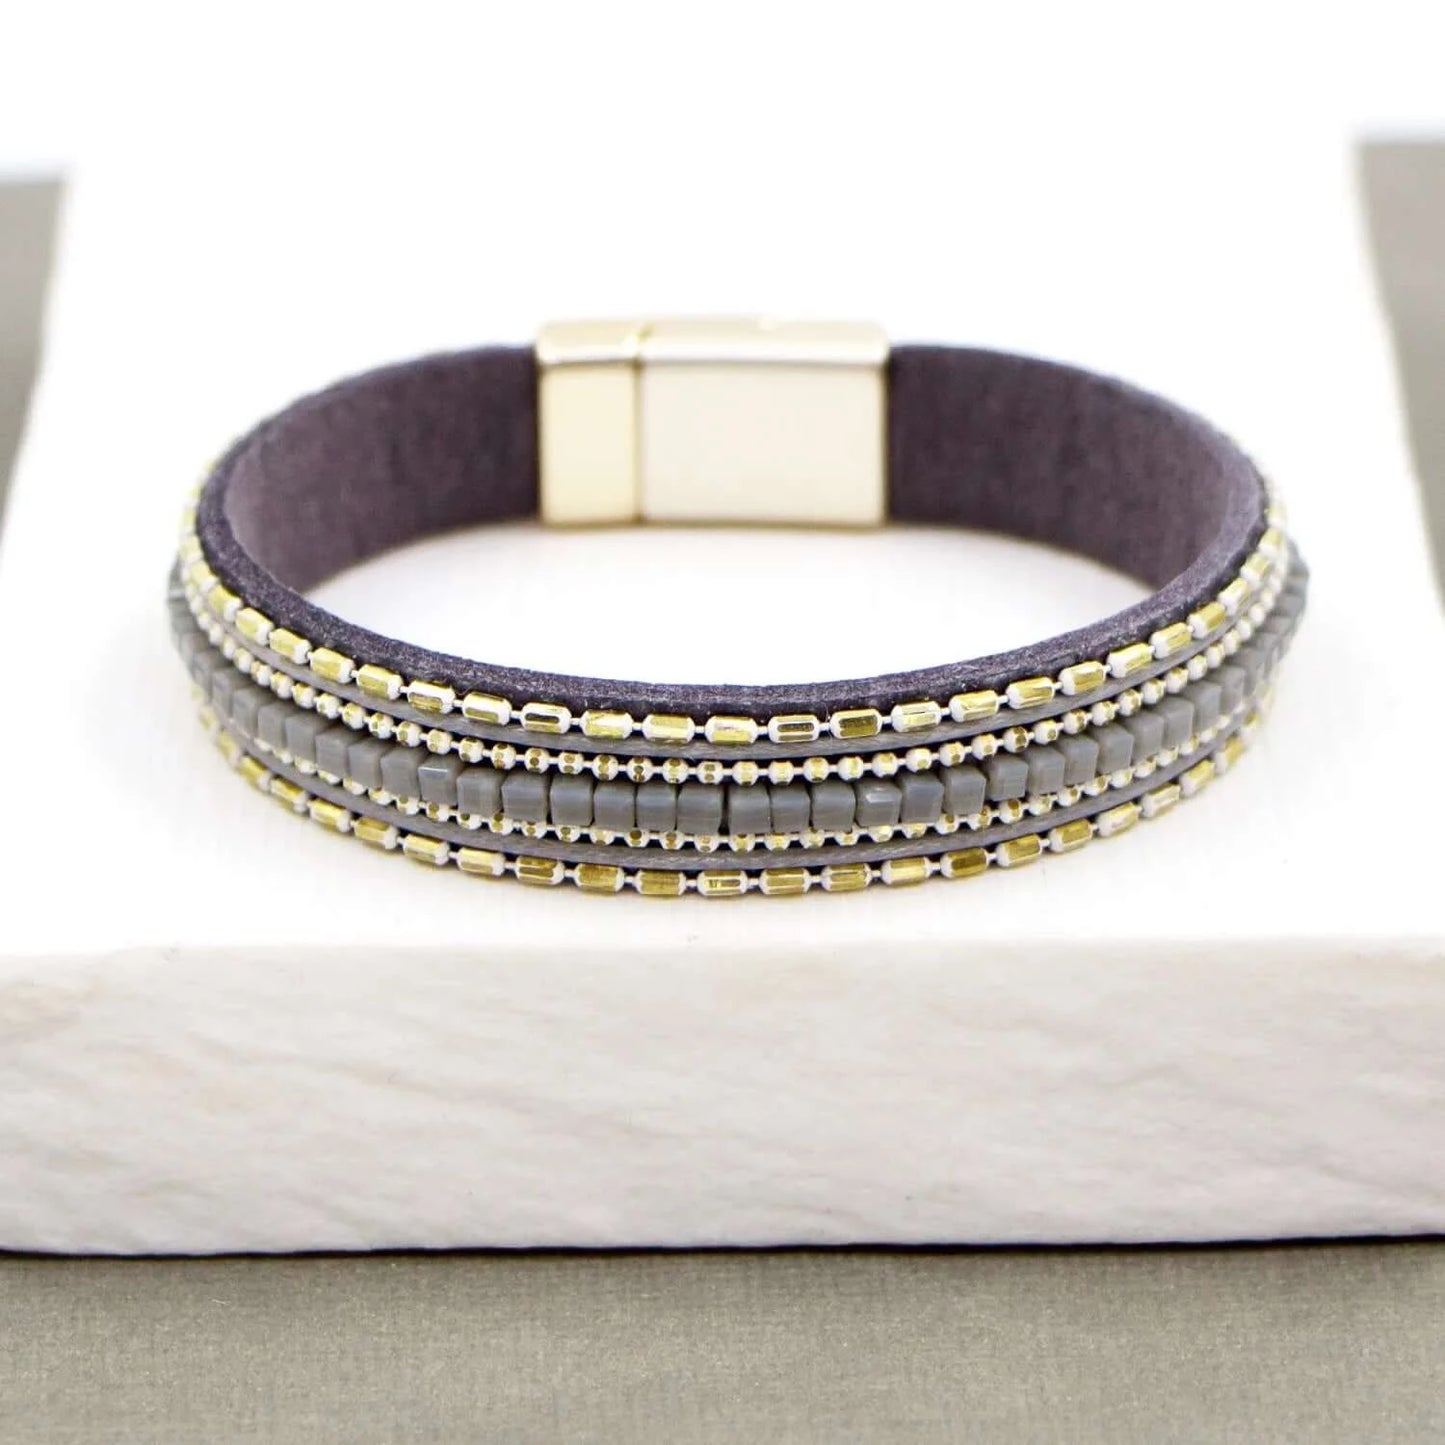 Simple magnetic bracelet with square bead inlay